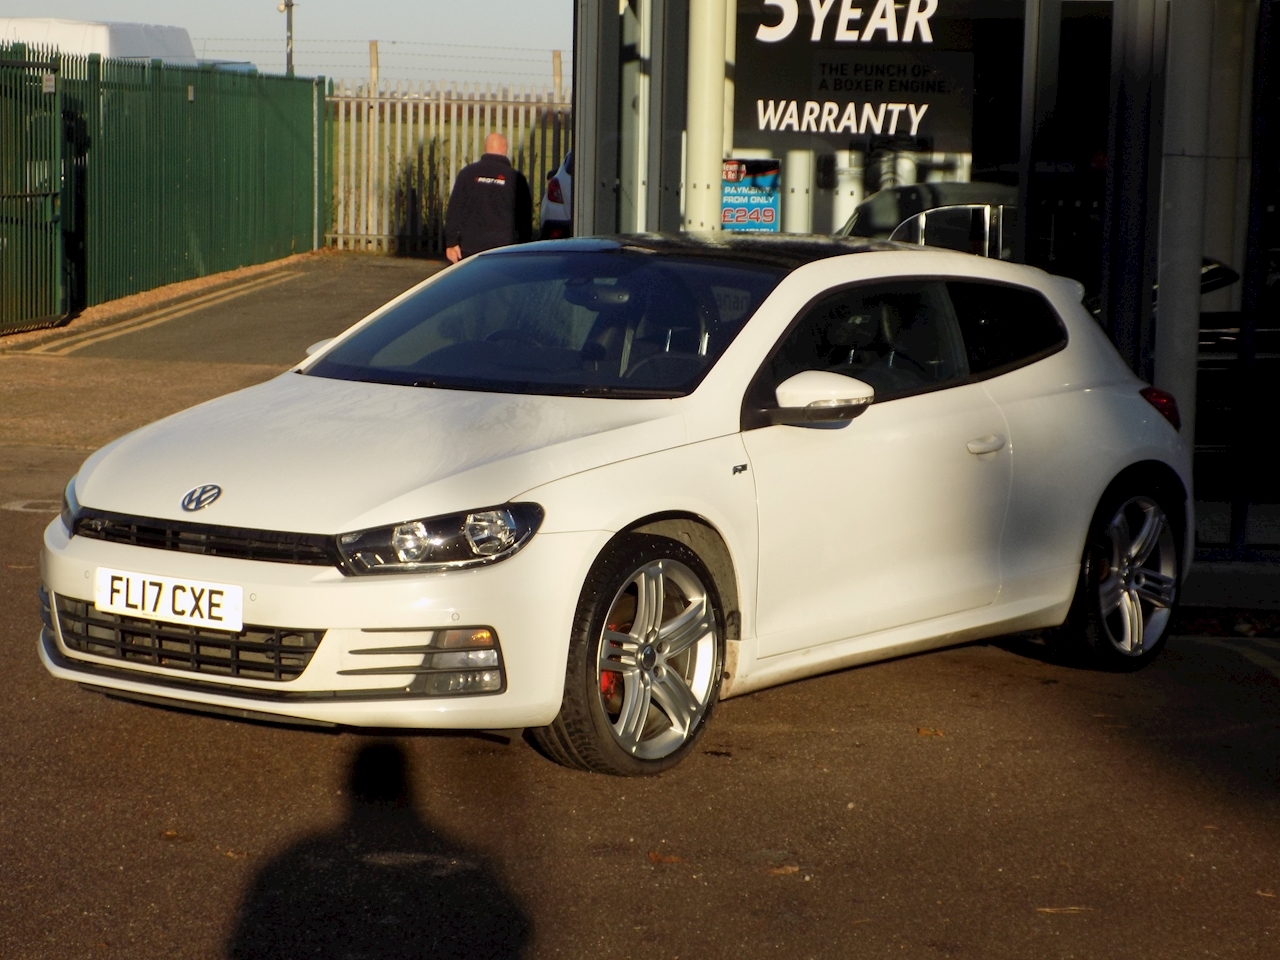 Scirocco Scirocco R Line Tsi Bluemotion Technology 2.0 2dr Coupe Manual Petrol